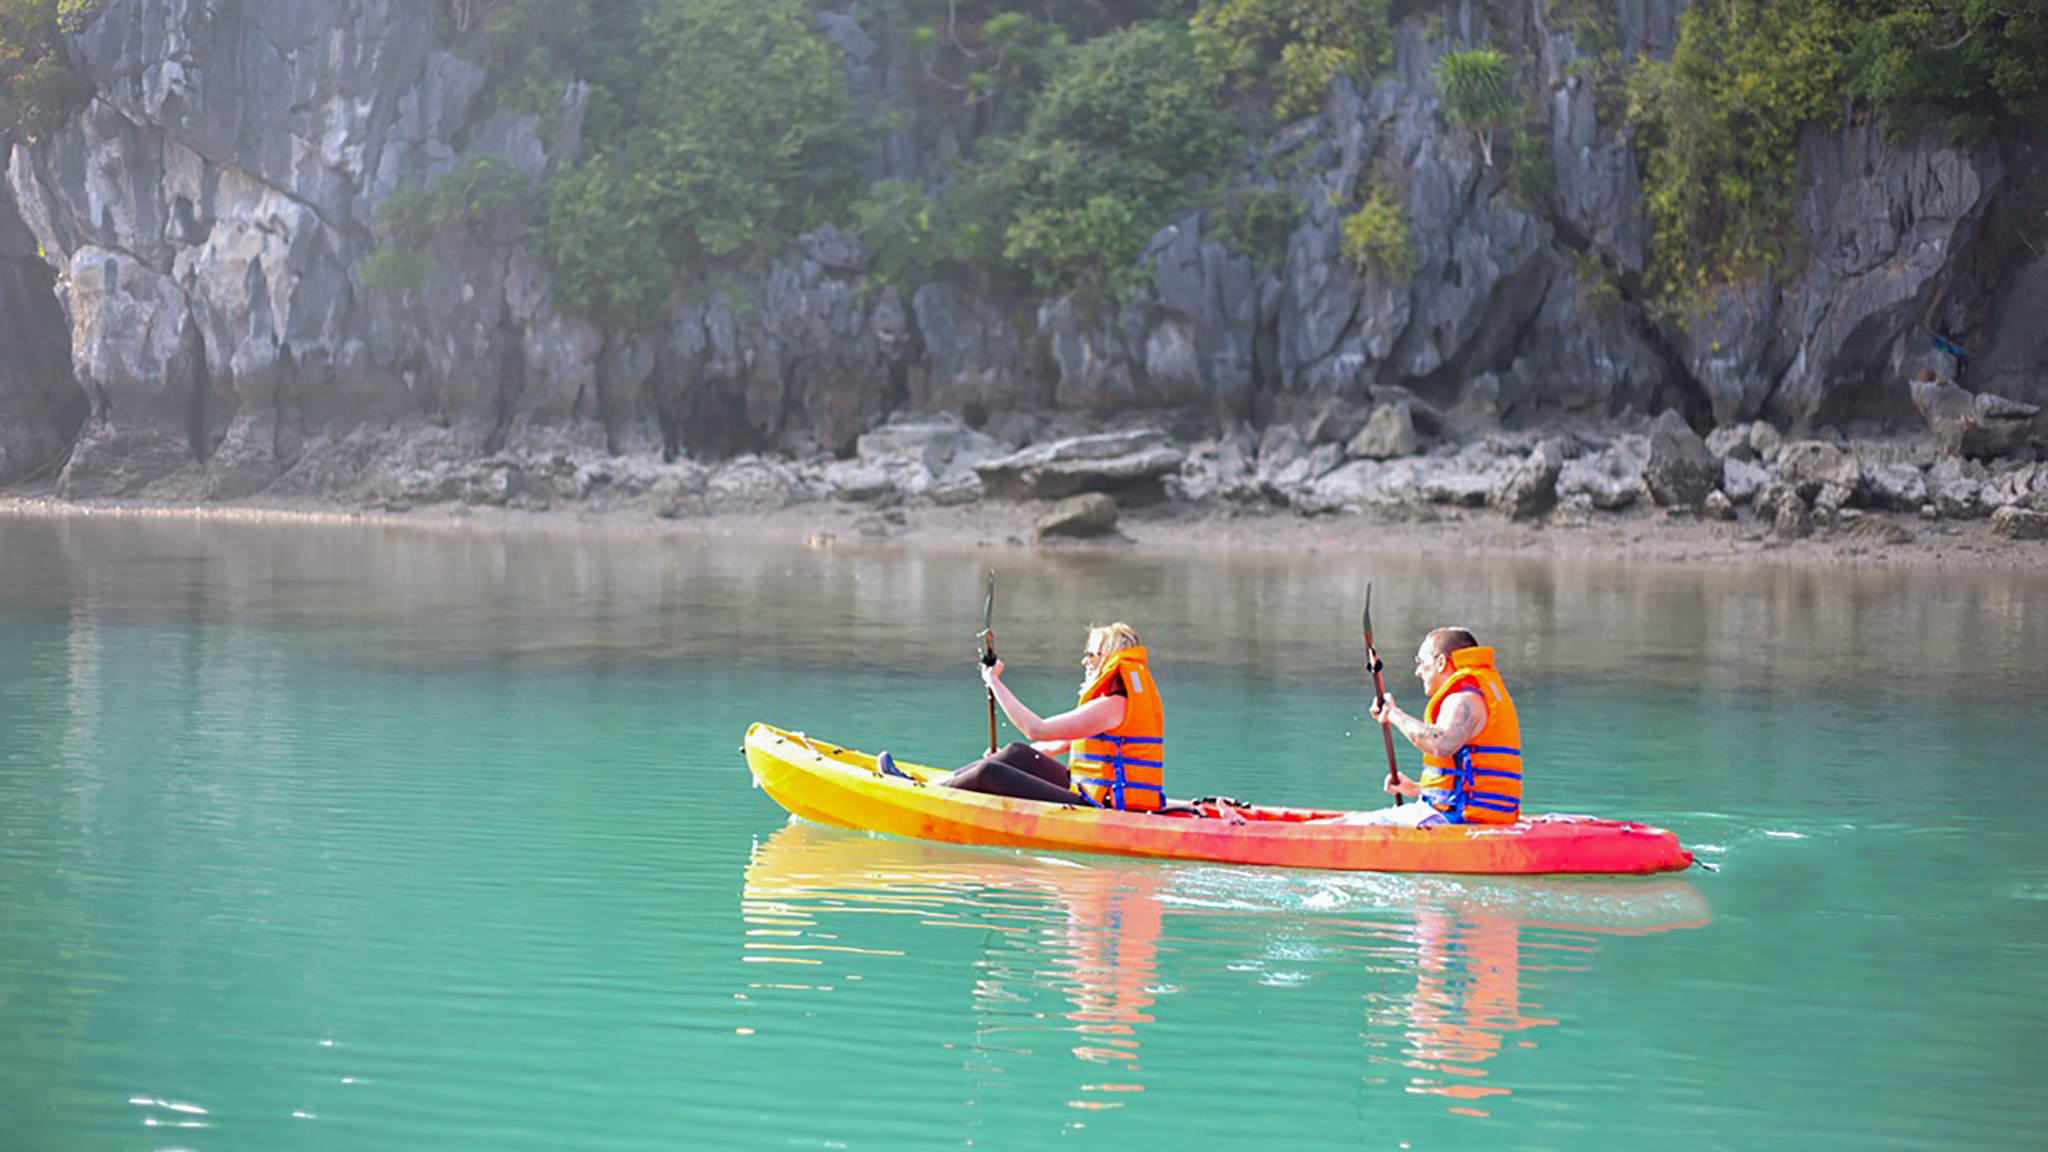 Kayaking to in Cong Dam area